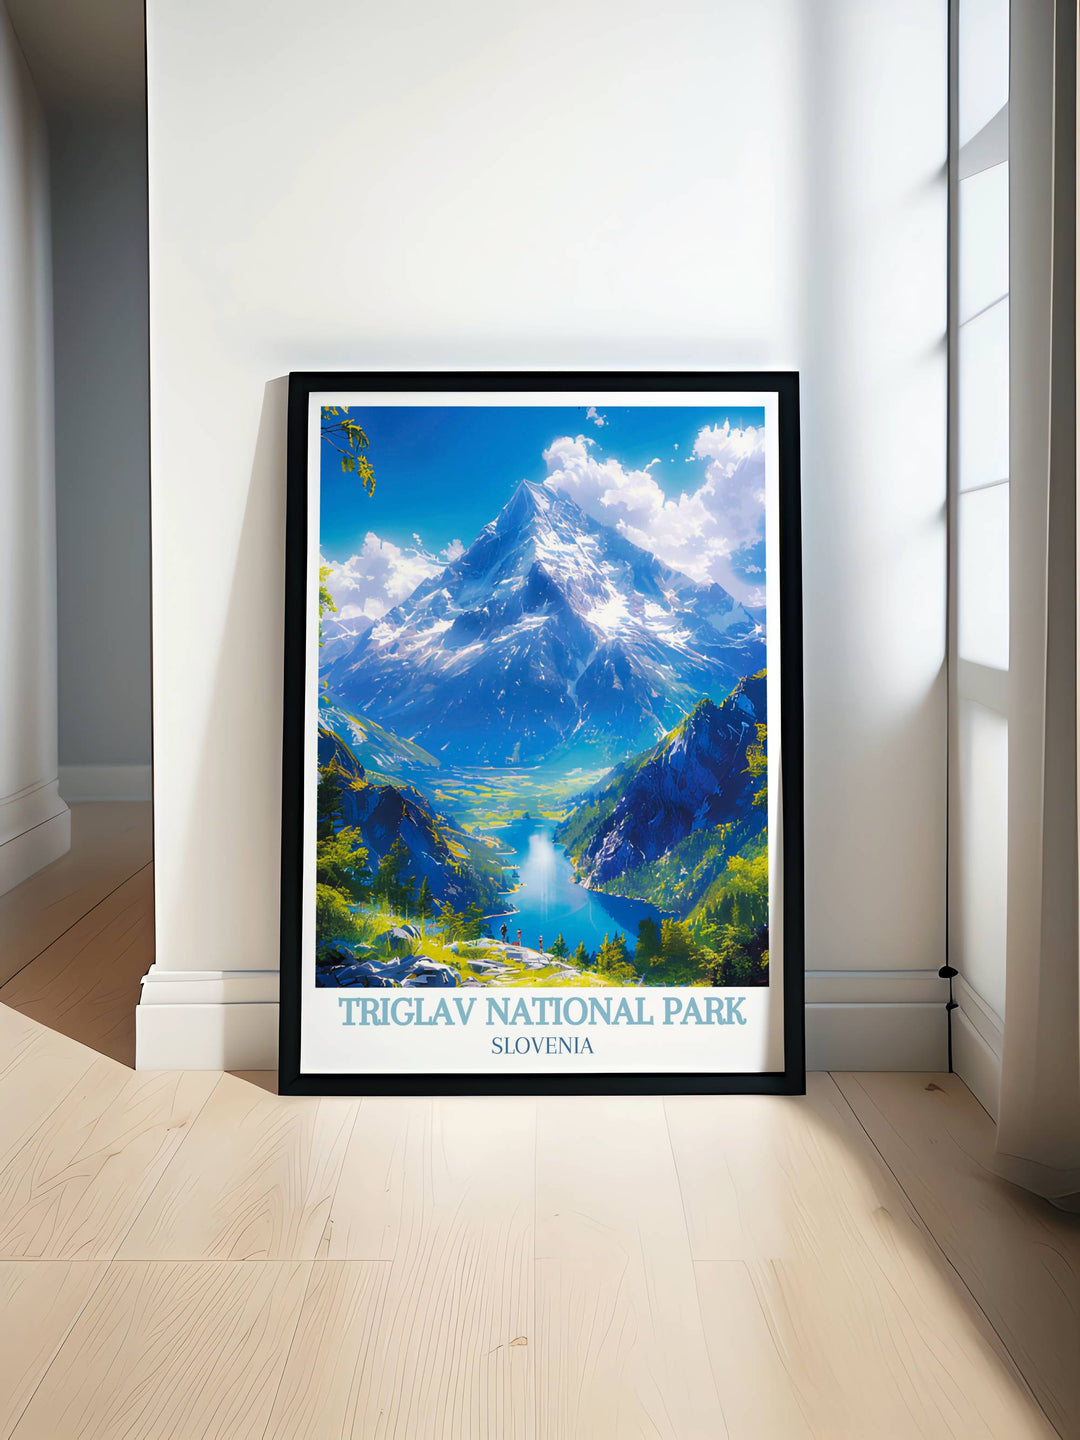 Triglav National Park fine art print showcasing the majestic peaks of Mount Triglav, with vibrant colors and intricate details capturing the breathtaking scenery of the Julian Alps in Slovenia, perfect for enhancing your home decor.